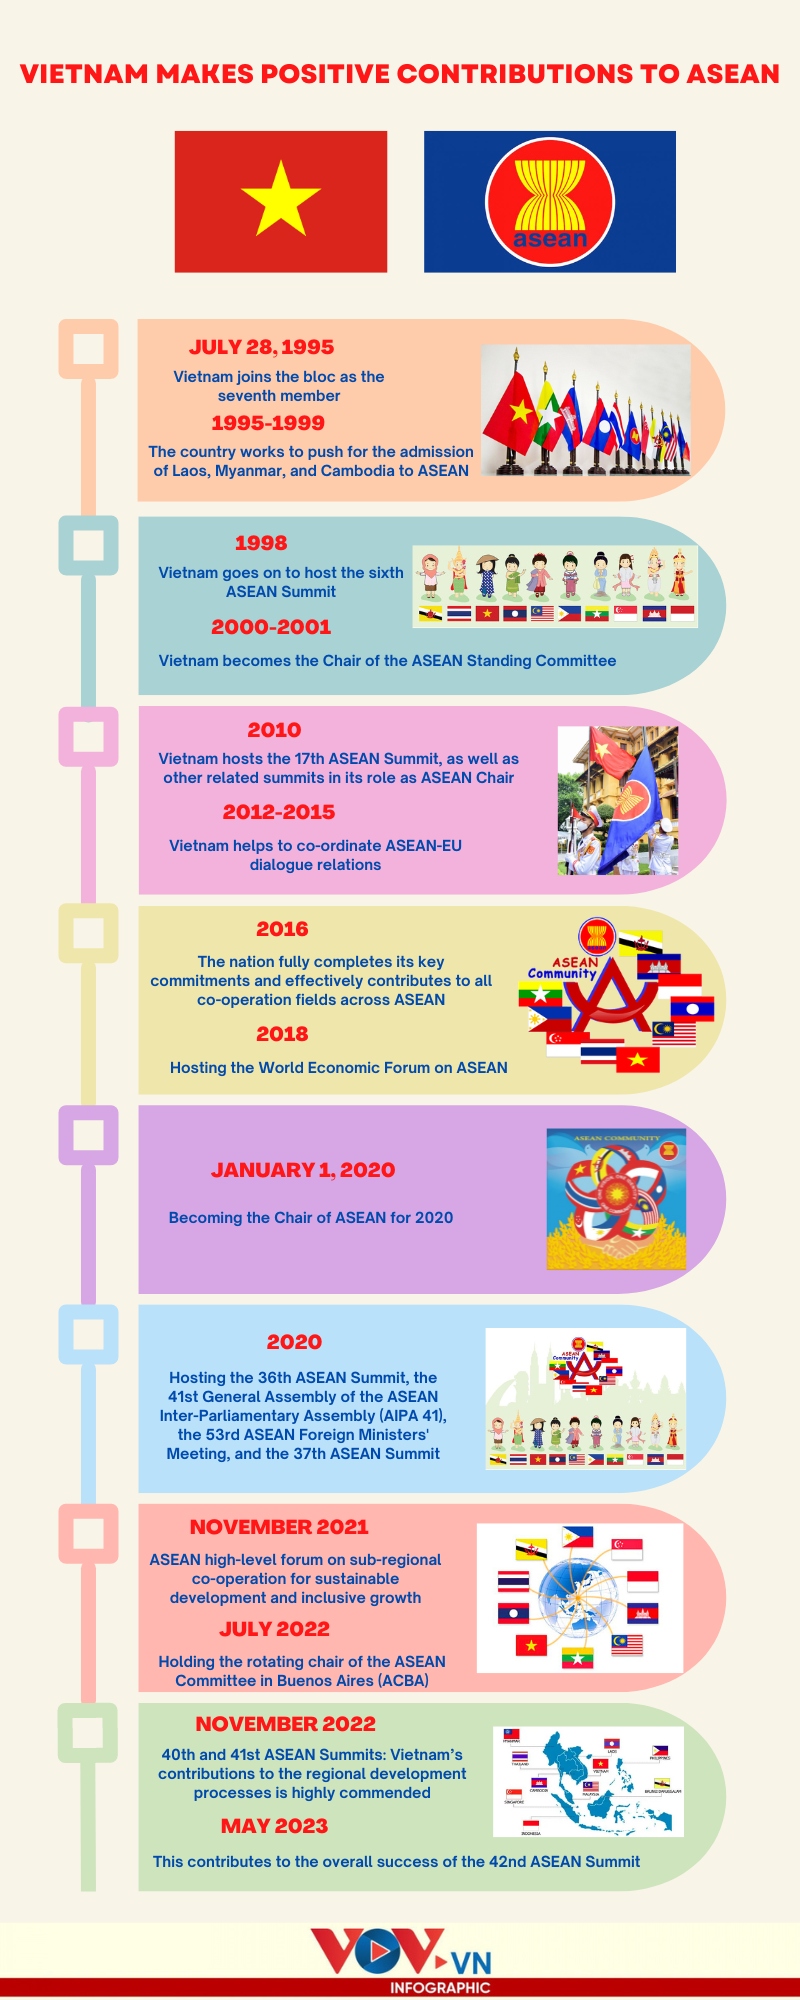 overview of vietnam-asean relations during 28 years picture 1